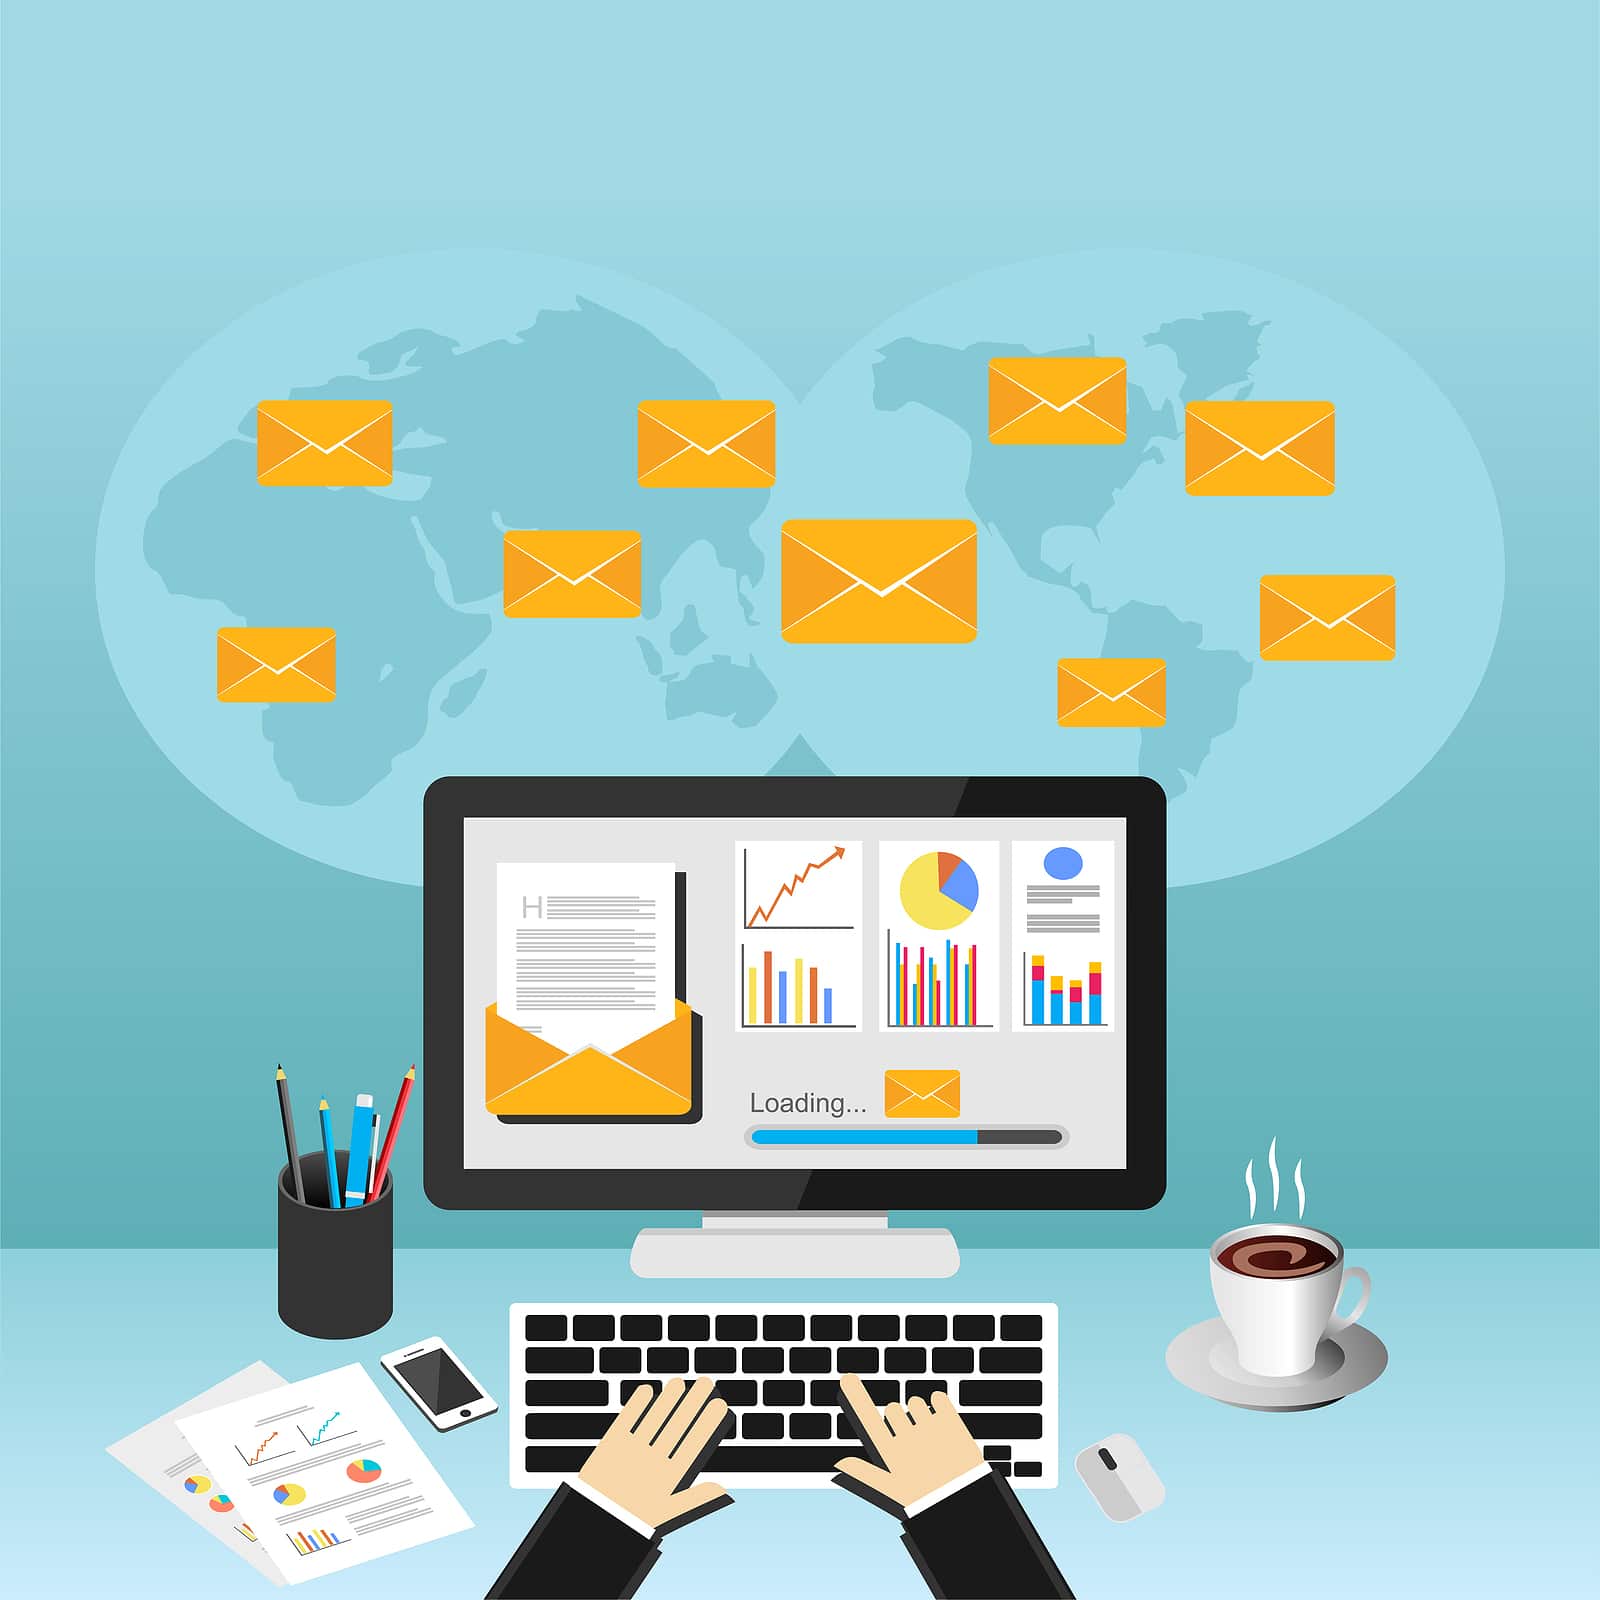 Steps to Starting An Email Marketing Business